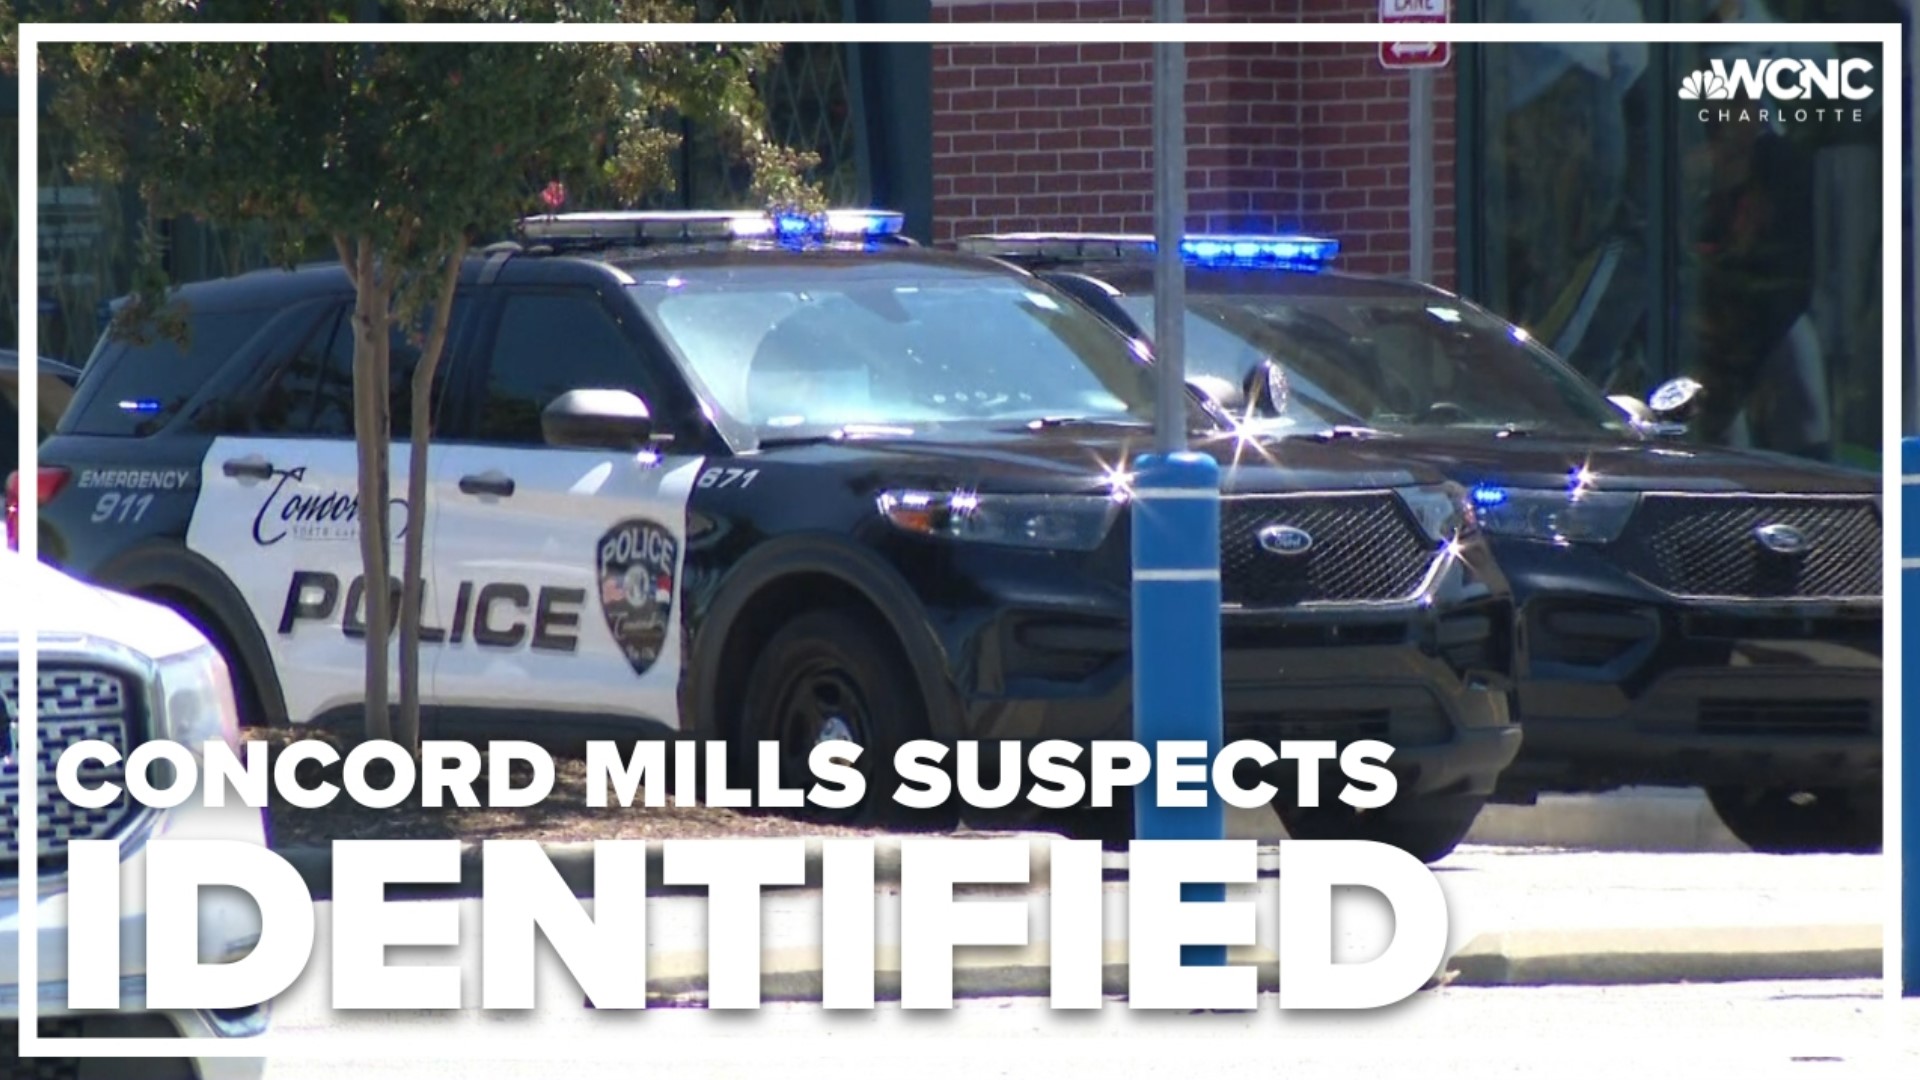 Concord Mills Mall will reopen Thursday, one day after an armed suspect was shot by police responding to a reported robbery.